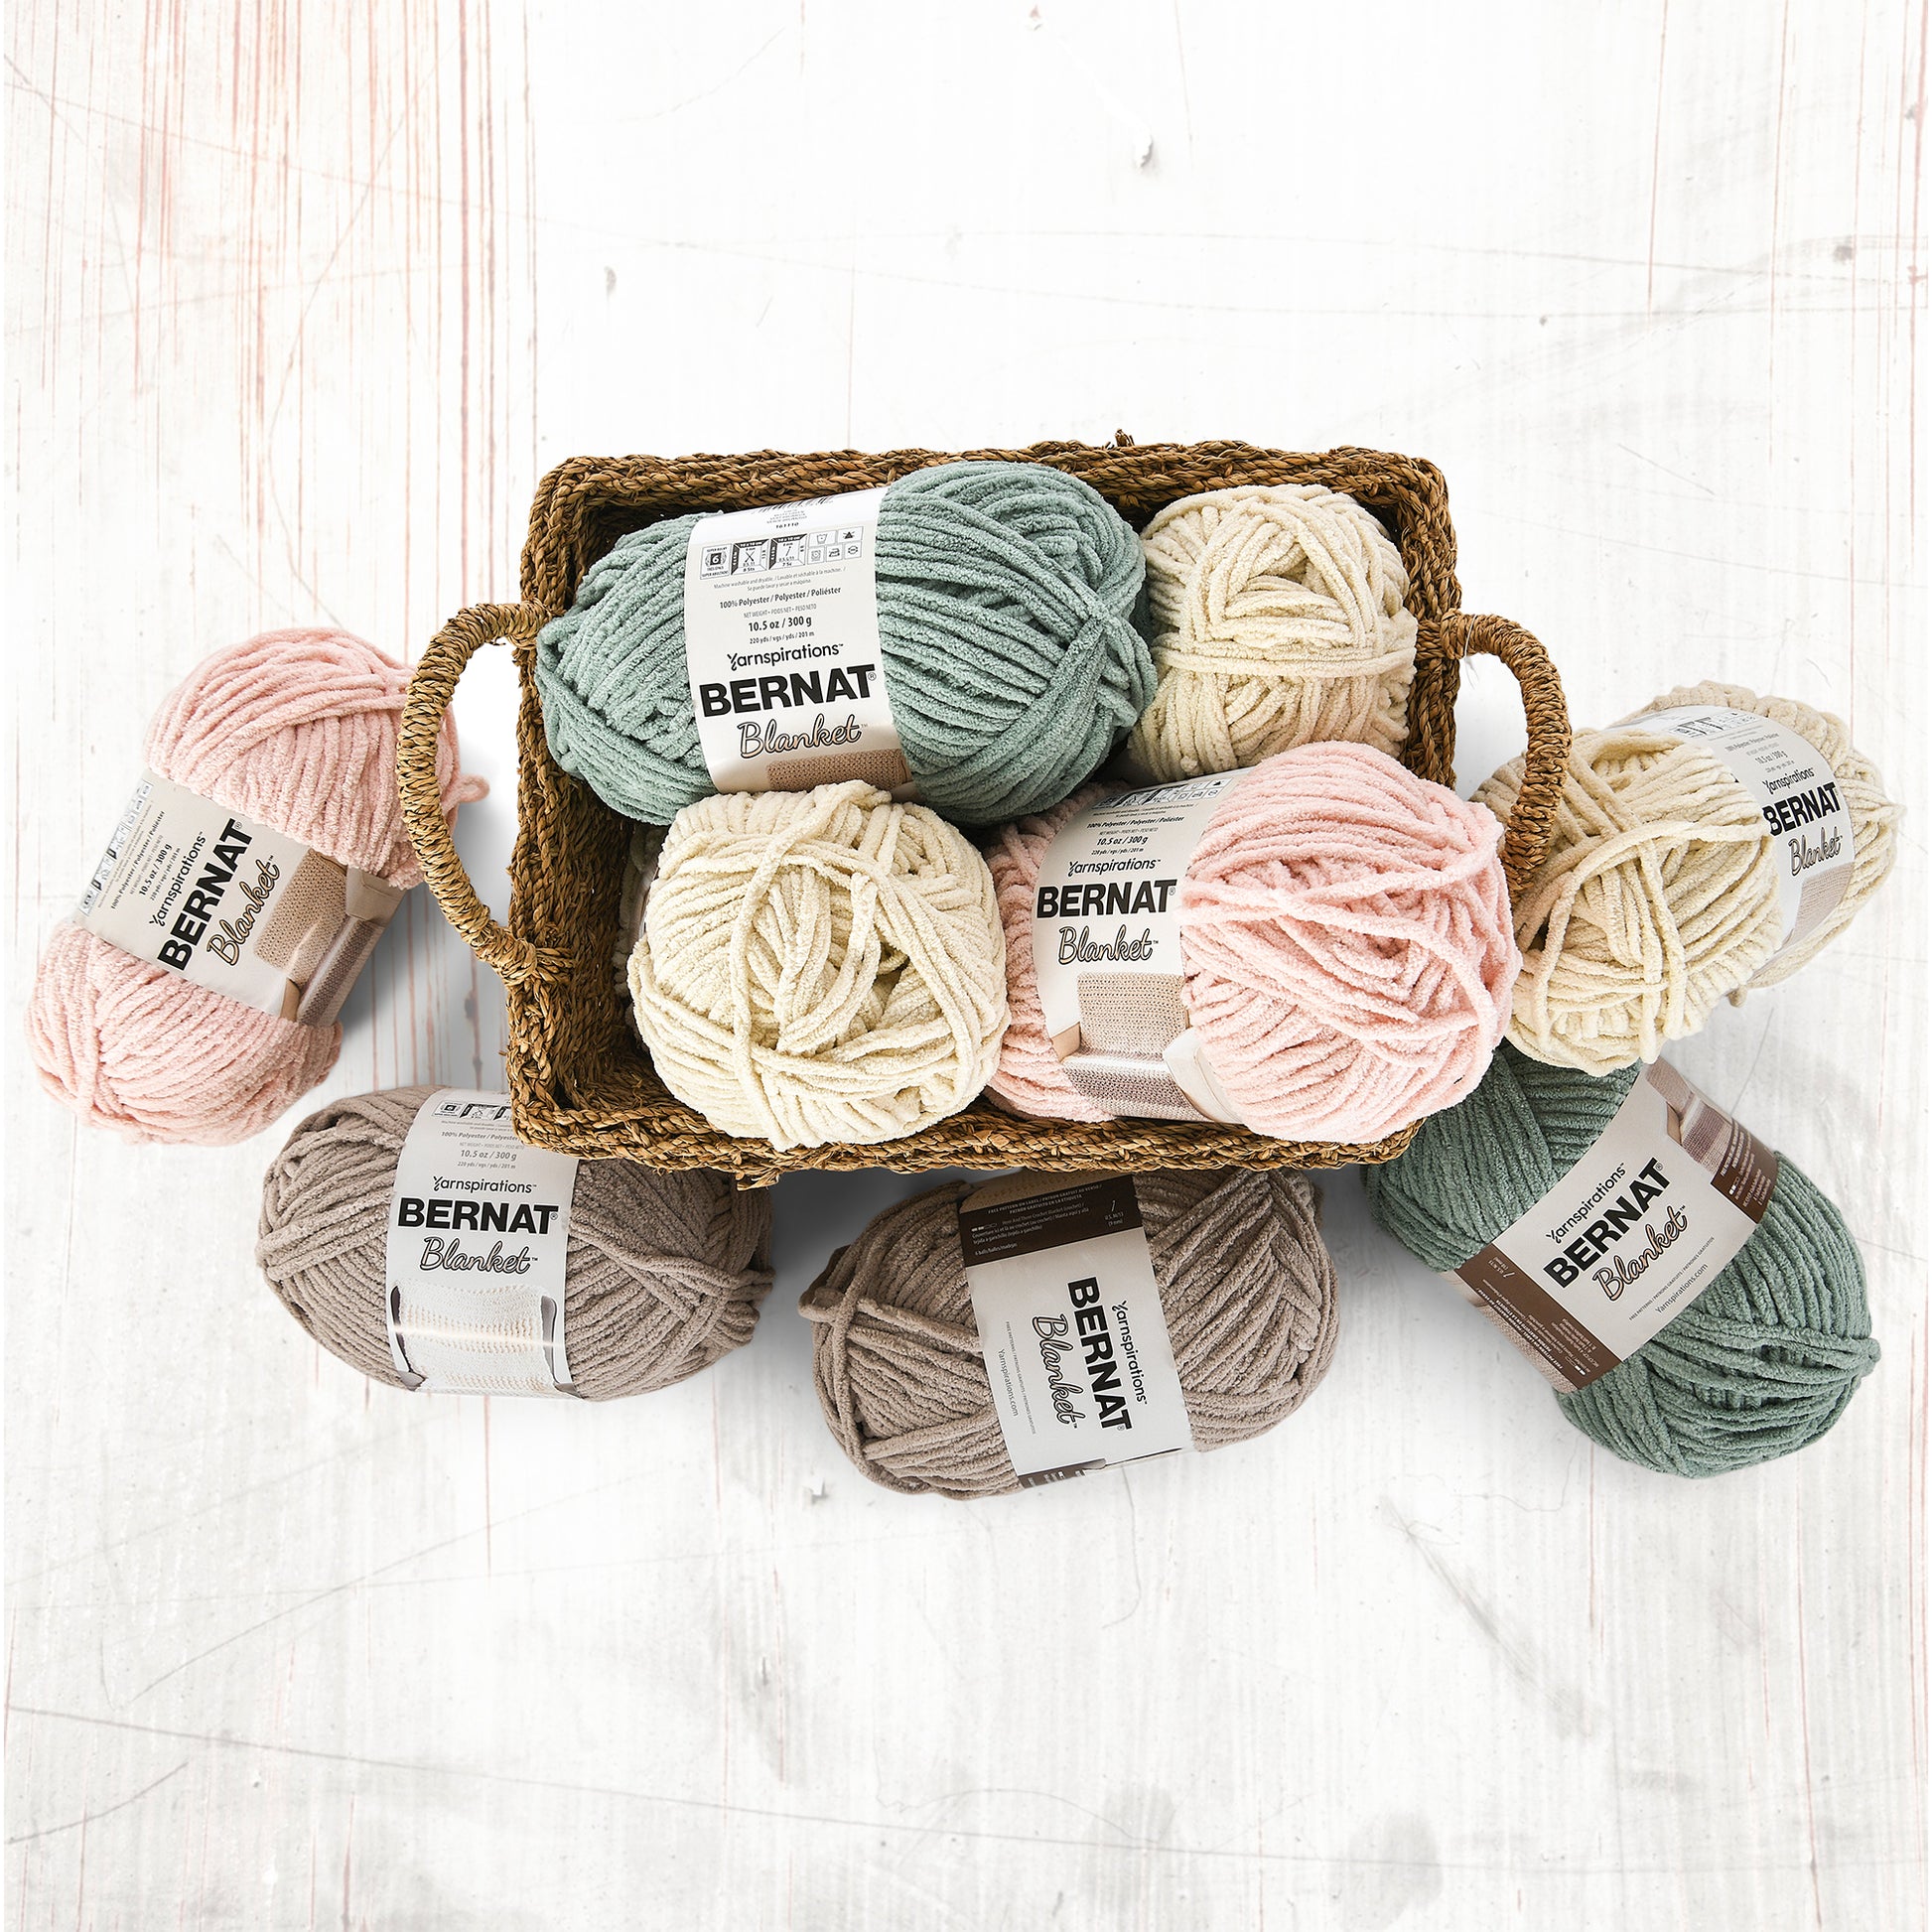 The Crochet Crowd Curated Sweet Treats Box